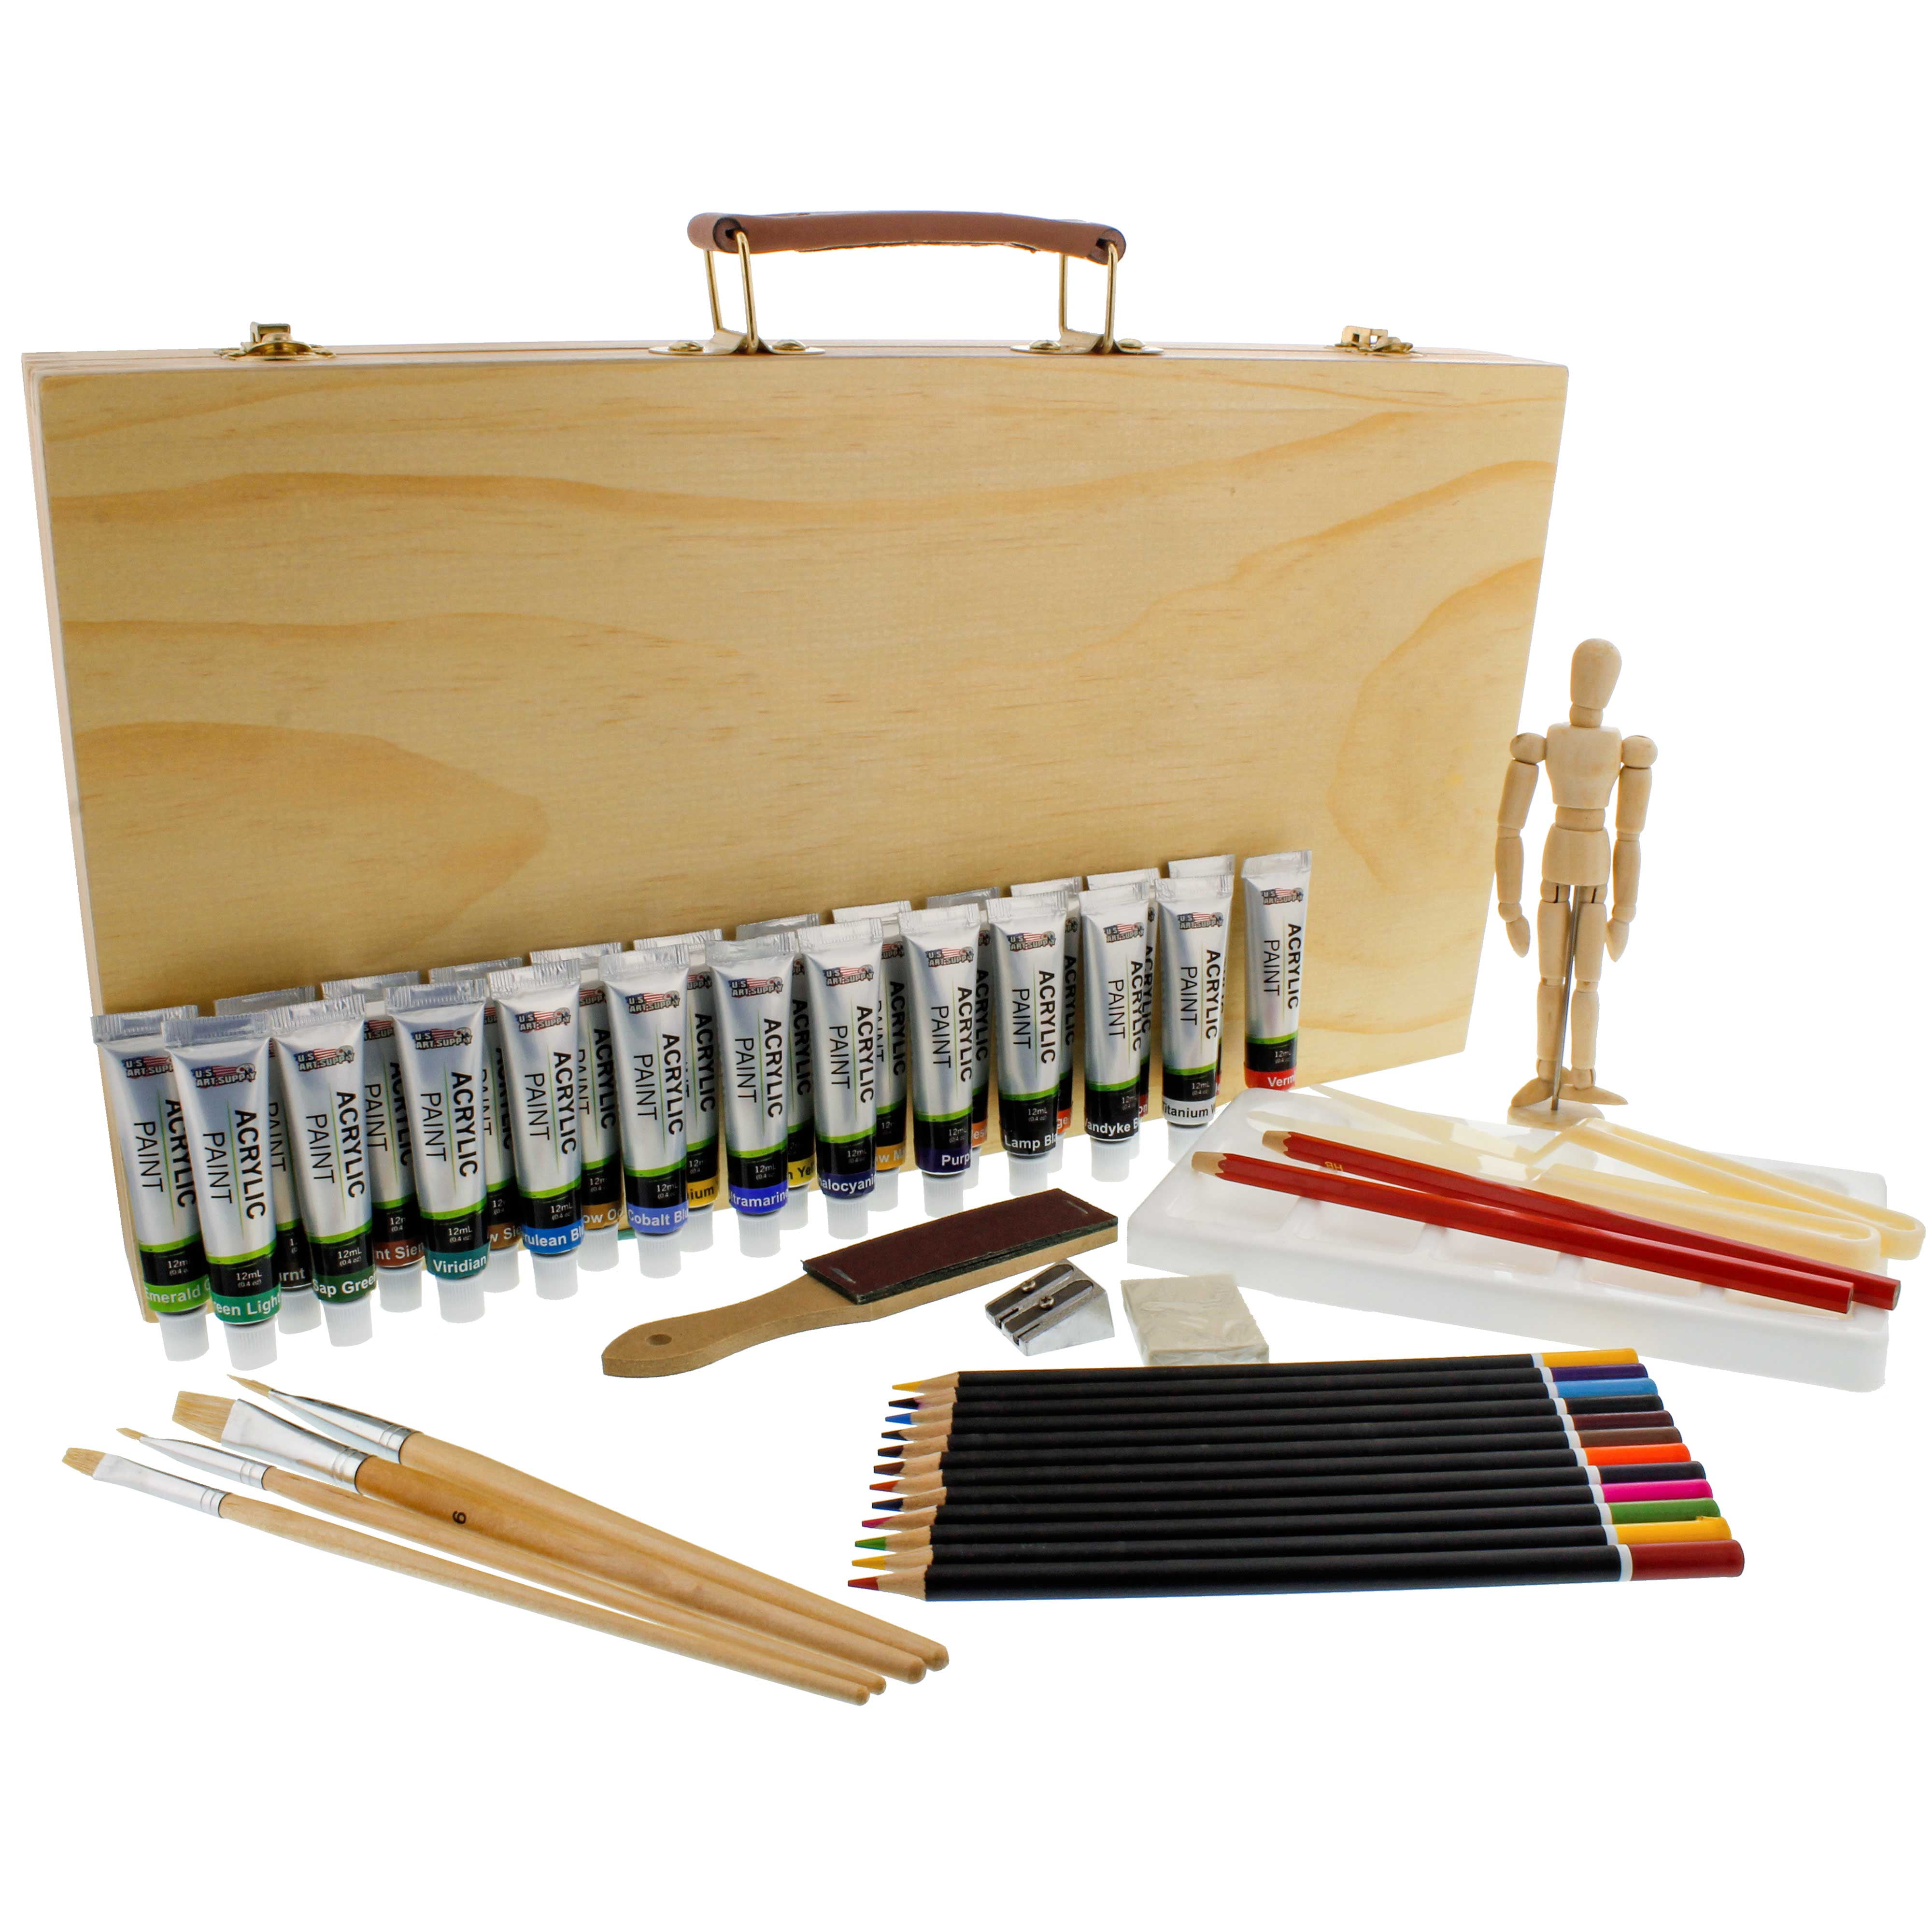 Acrylic Paint Set for Kids, Art Painting Supplies Kit with 12 Paints, –  WoodArtSupply